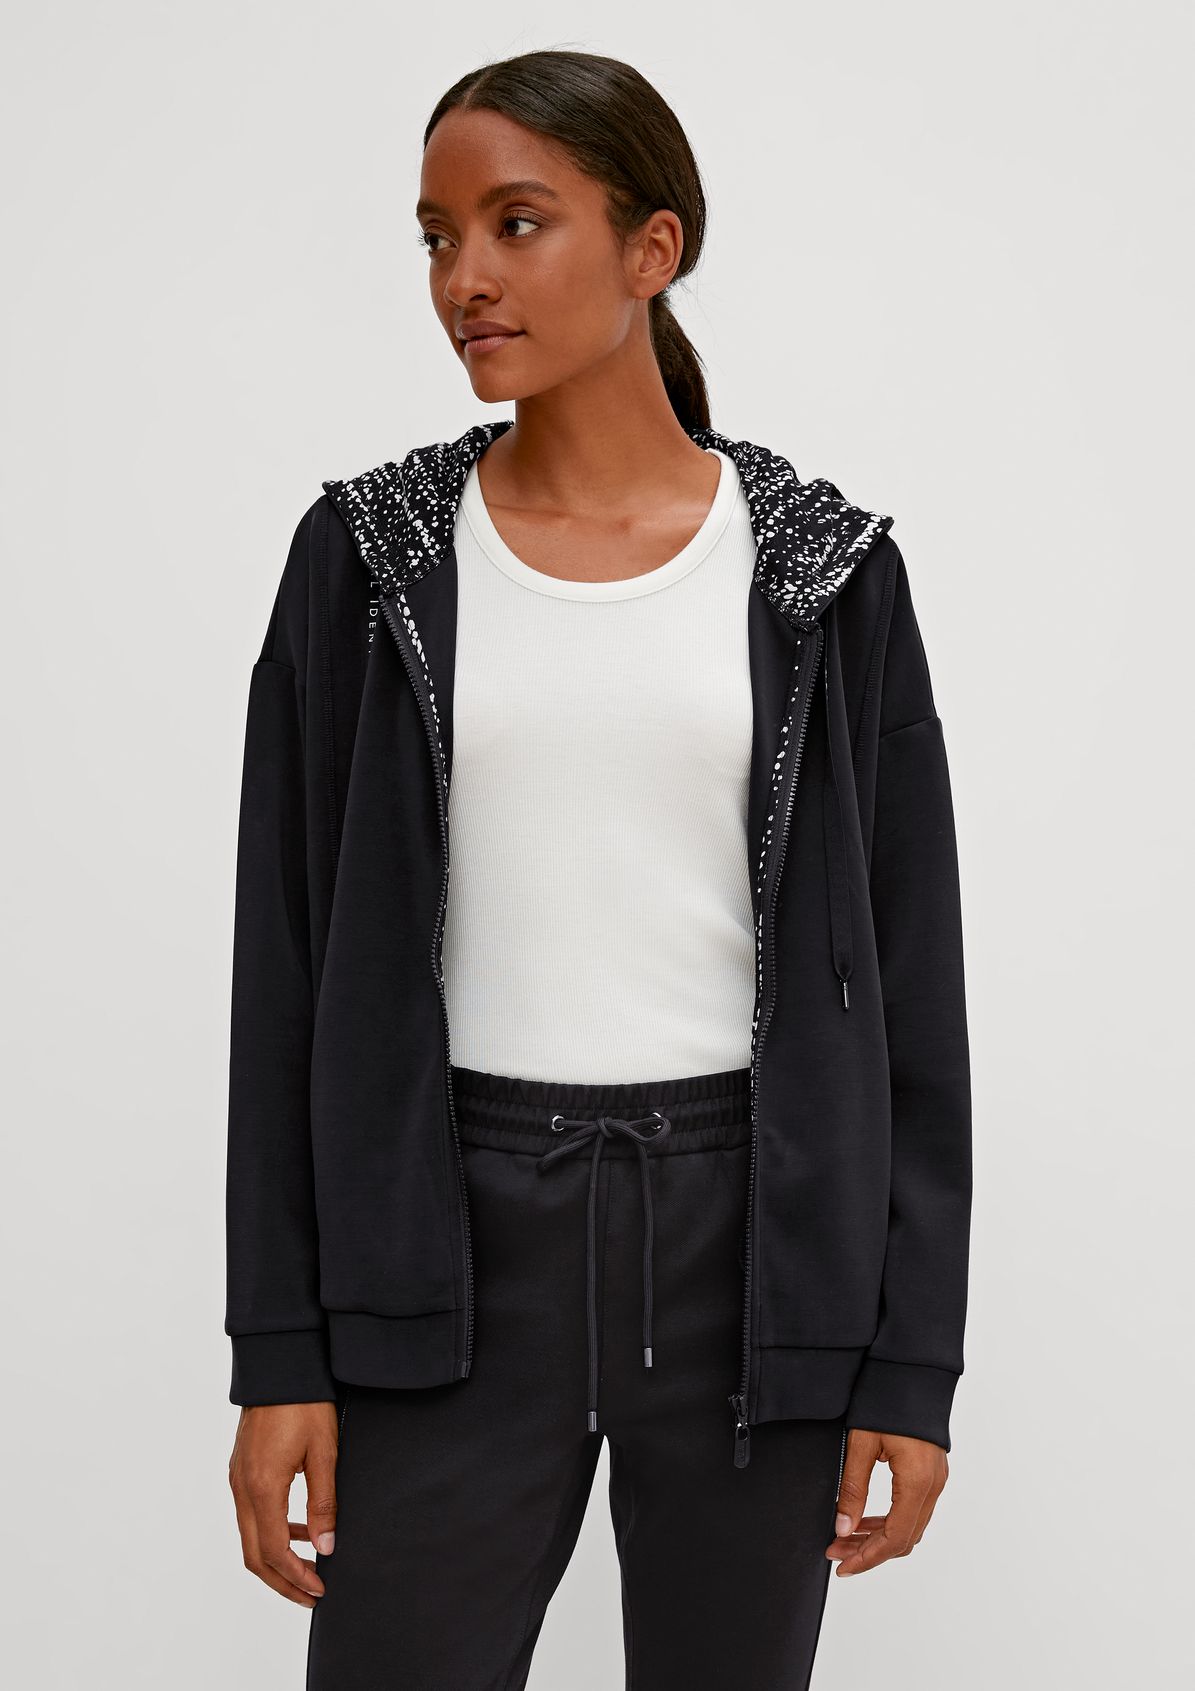 Scuba-style hooded jacket from comma